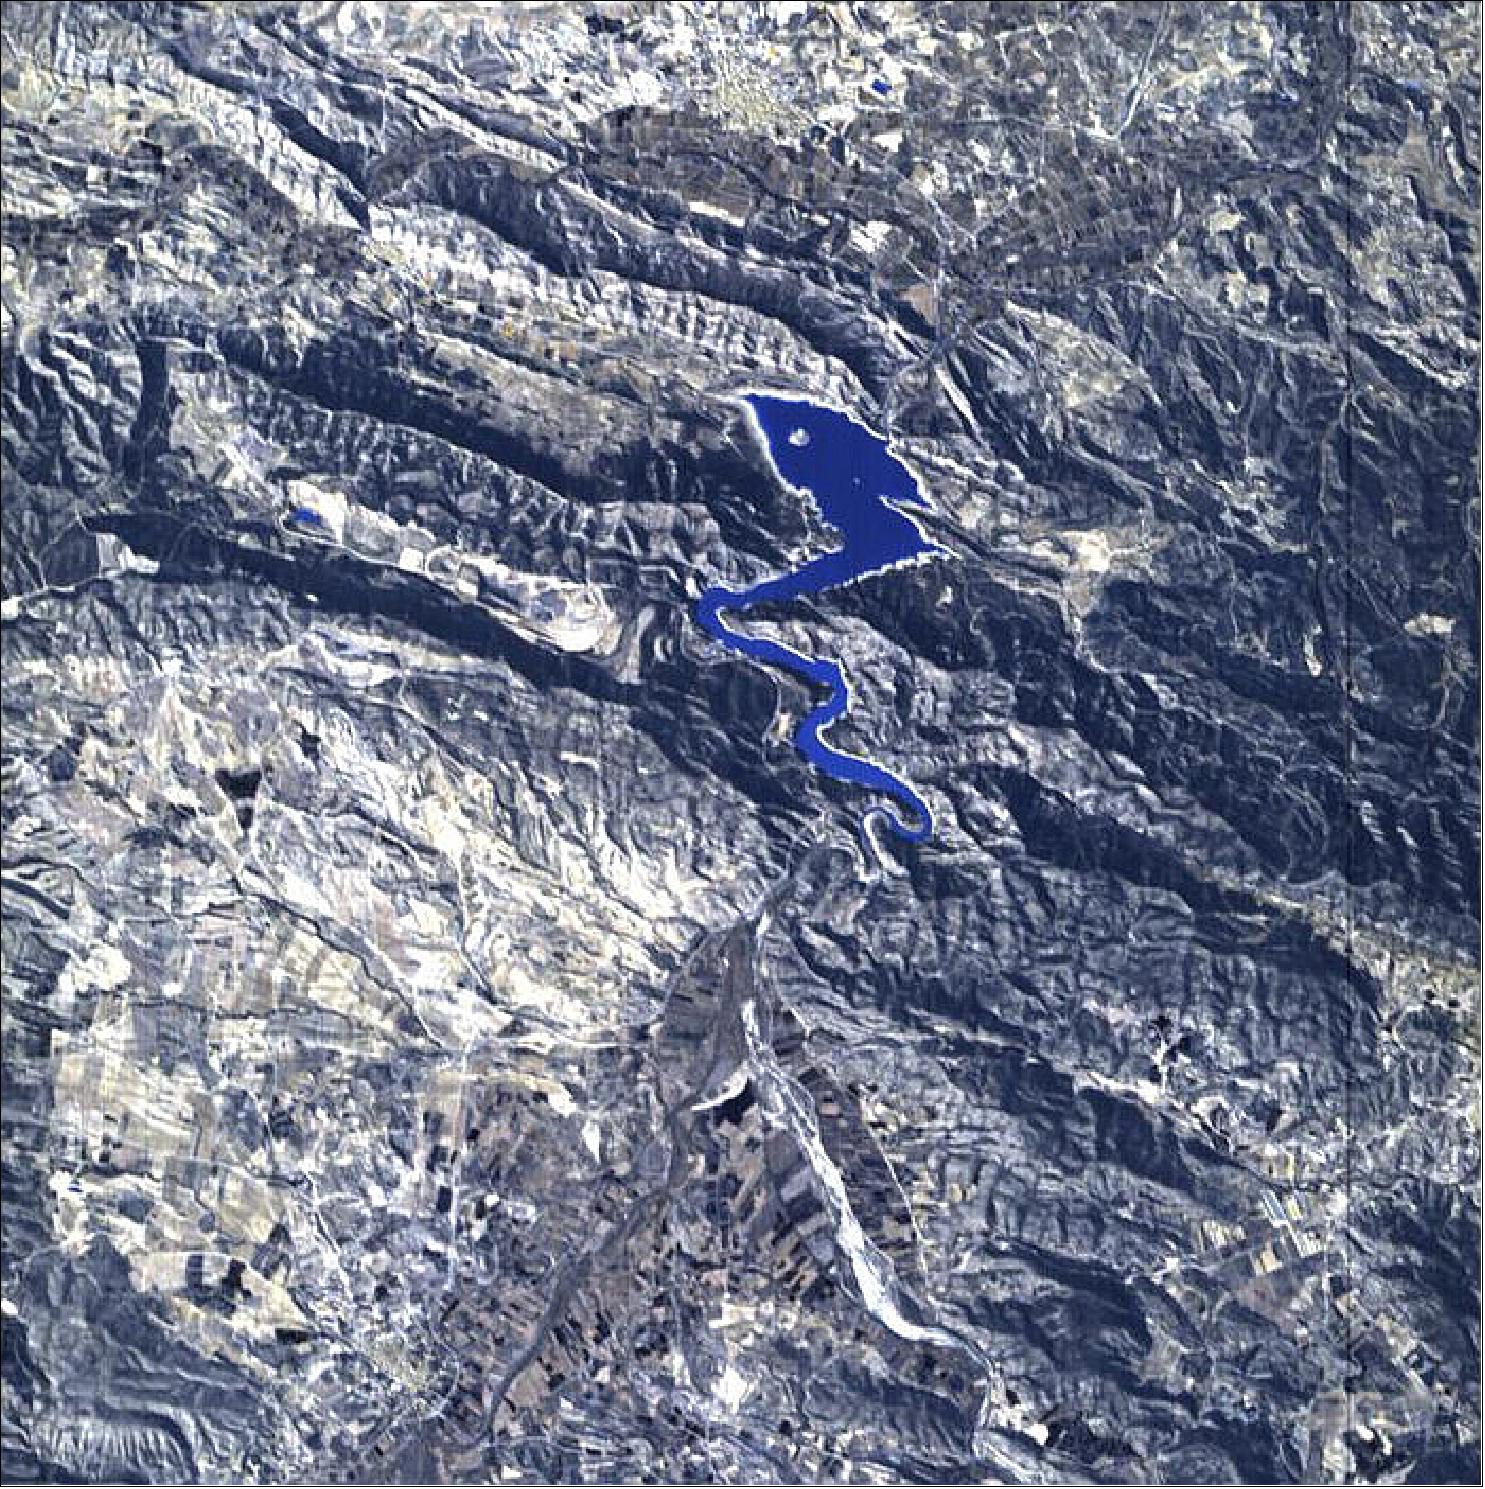 Figure 14: Technology image of the week: the vivid blue of a mountain reservoir imaged by PROBA-1, ESA’s oldest operational Earth-observing satellite (image credit: ESA, CC BY-SA 3.0 IGO)